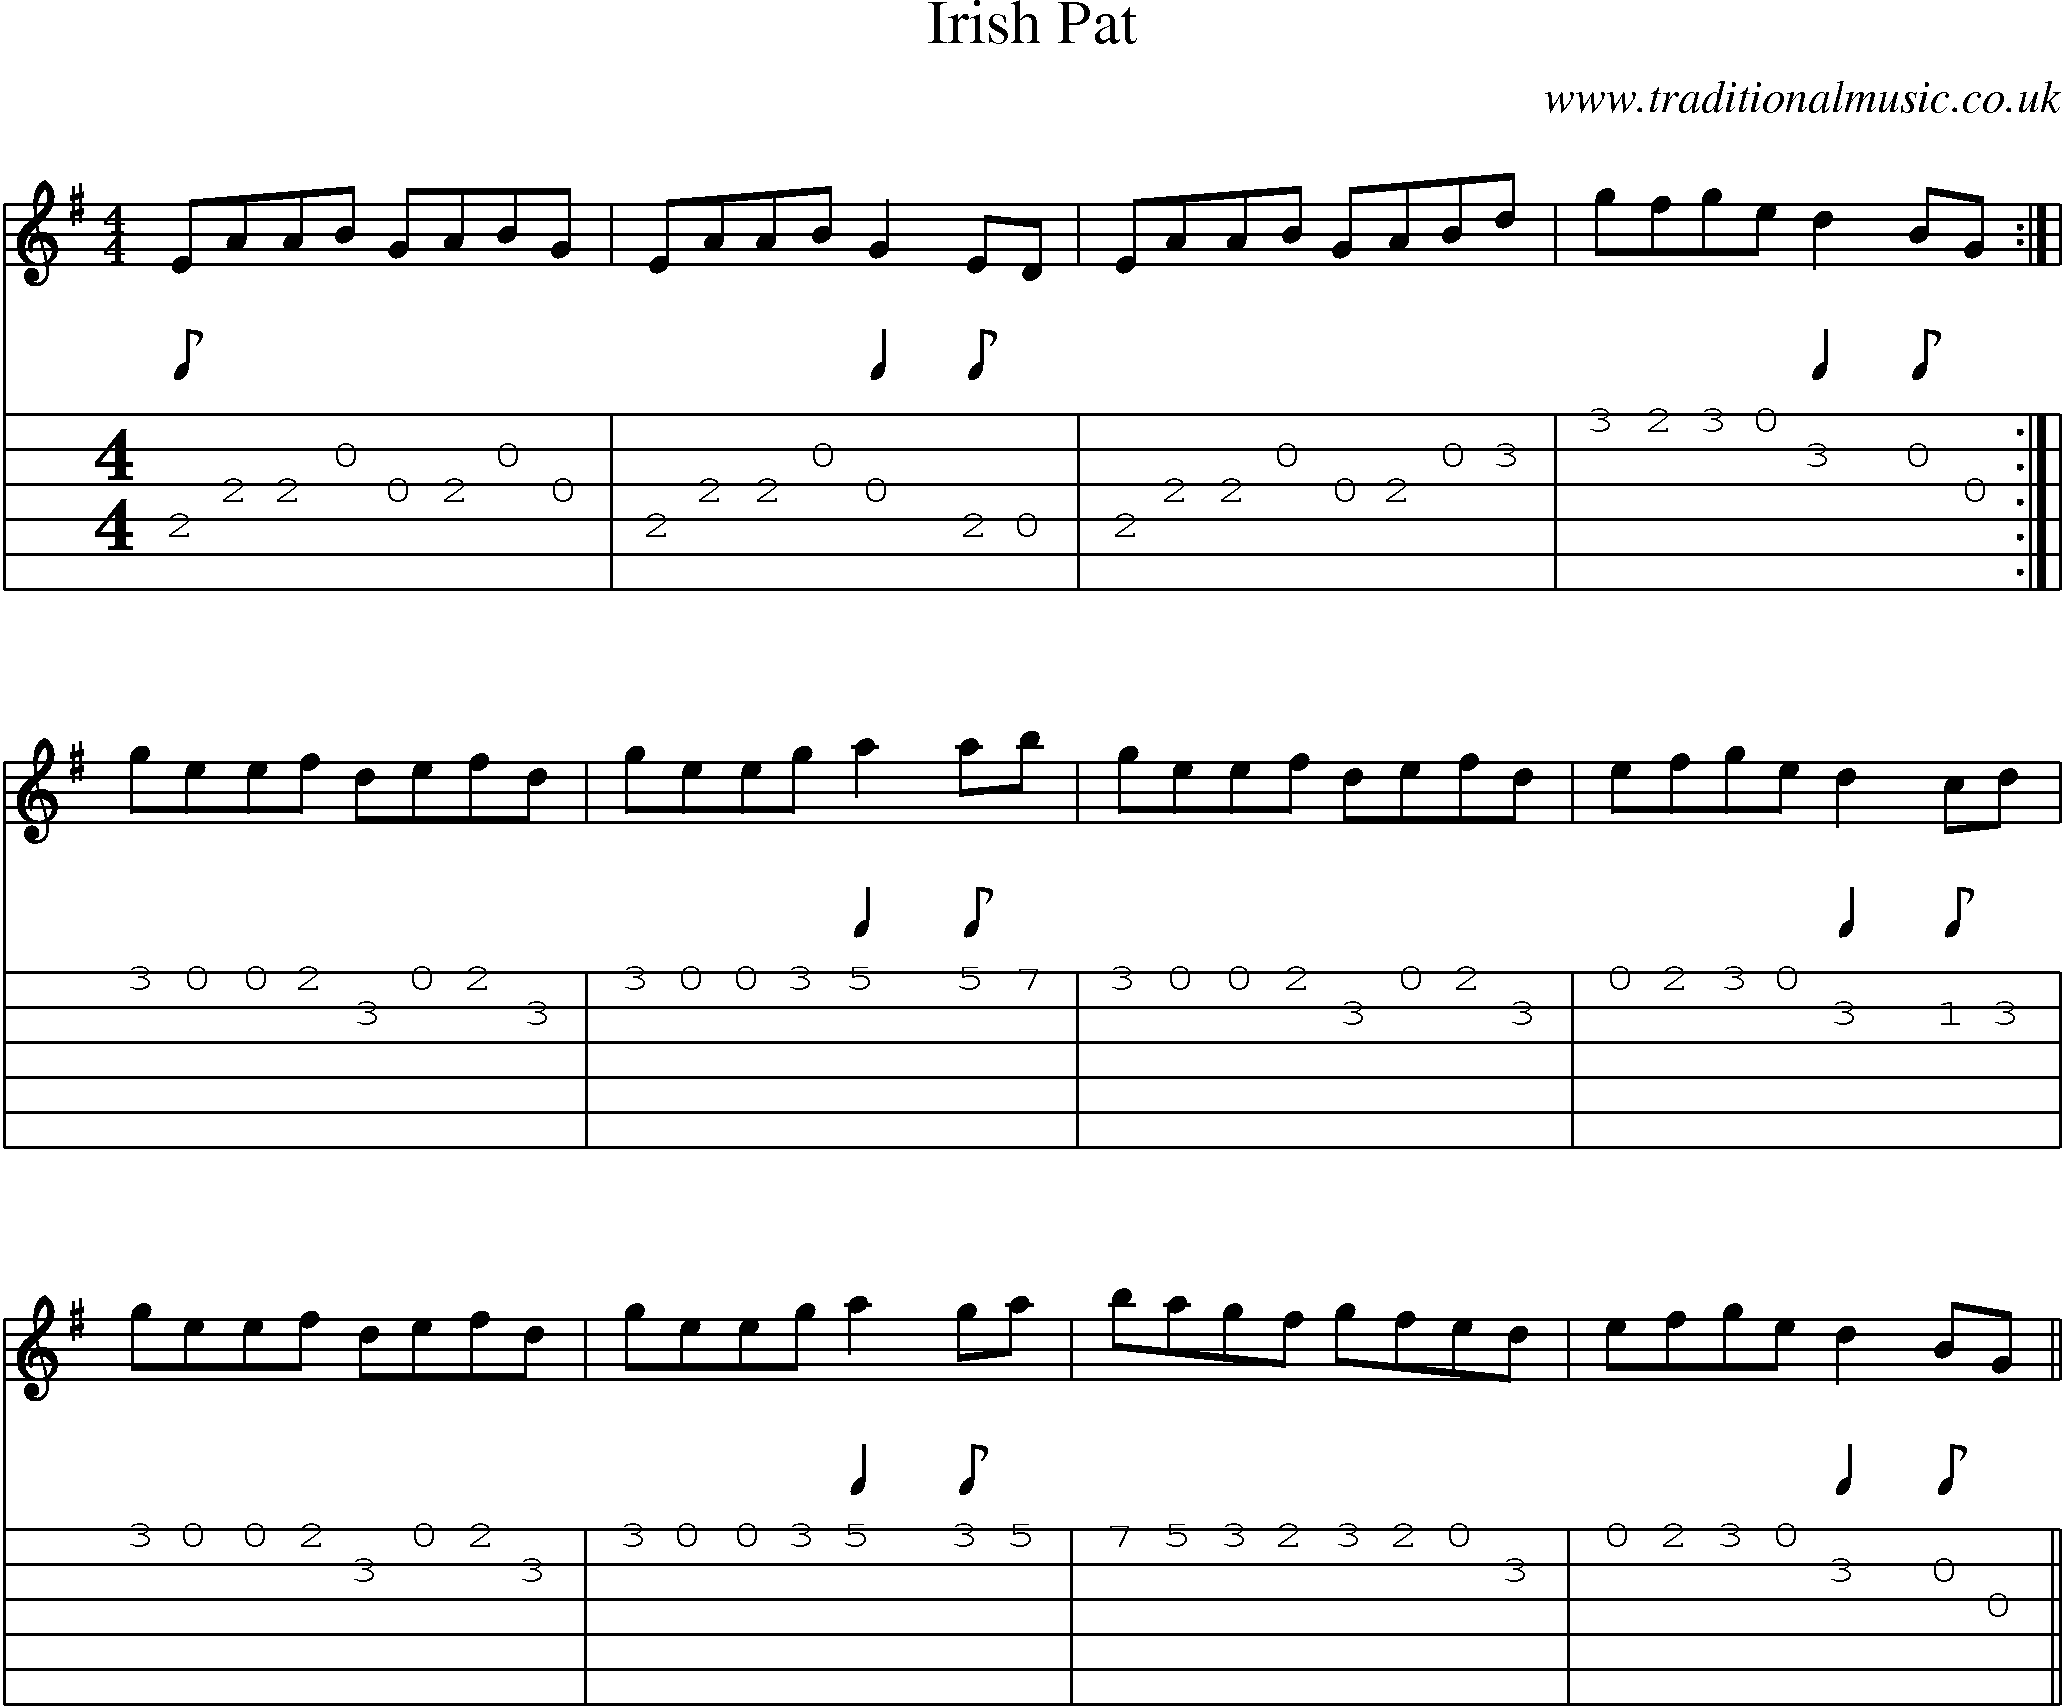 Music Score and Guitar Tabs for Irisat